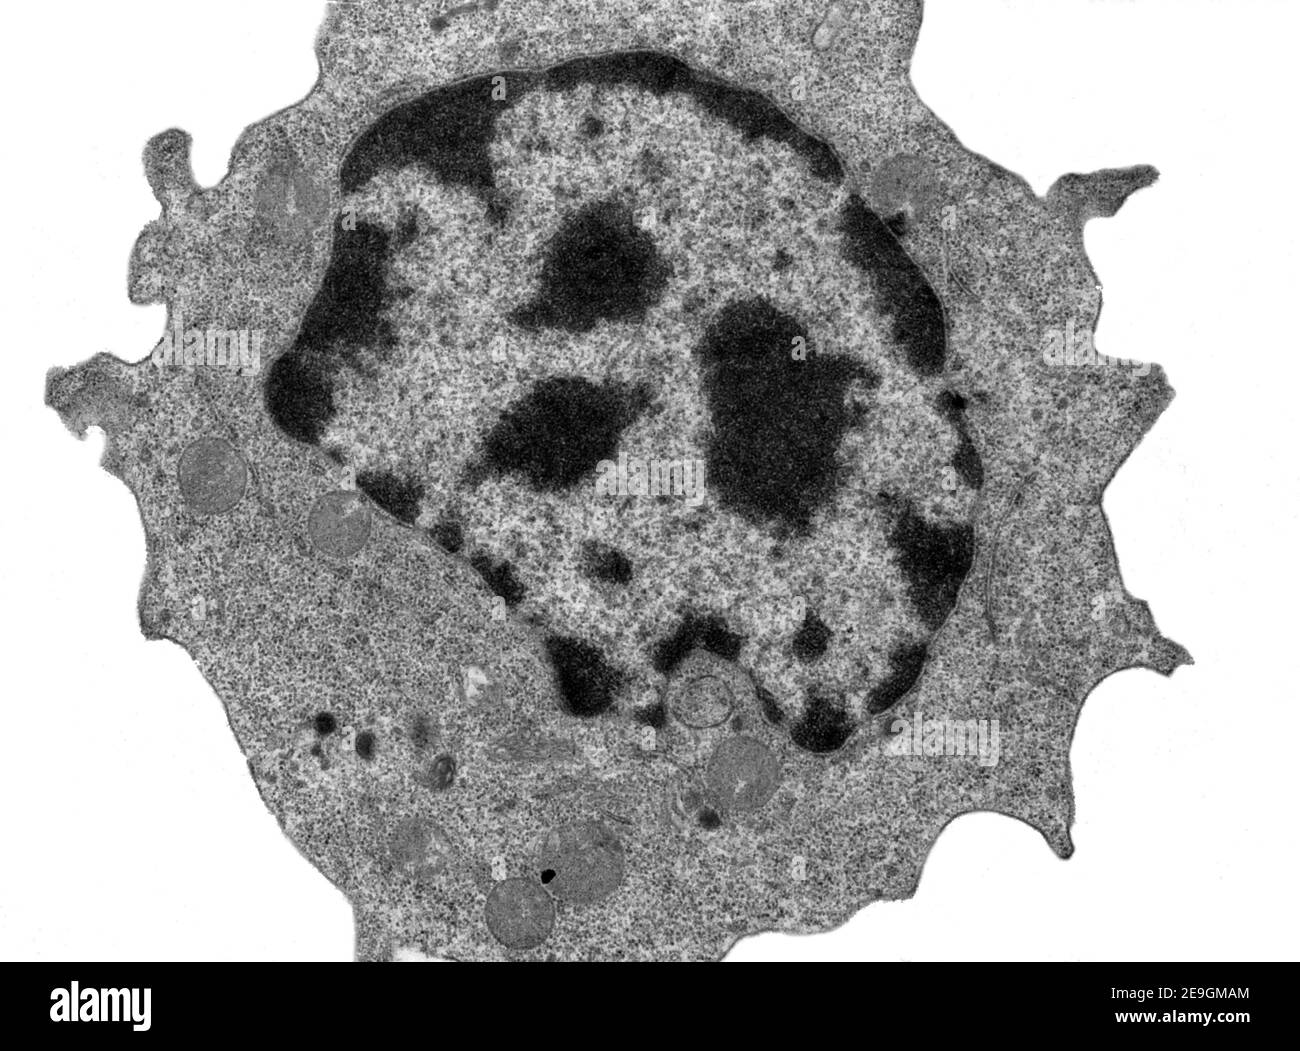 Transmission electron microscope (TEM) micrograph showing a medium-sized lymphocyte with small pseudopodia. The cytoplasm contains many free ribosomes Stock Photo